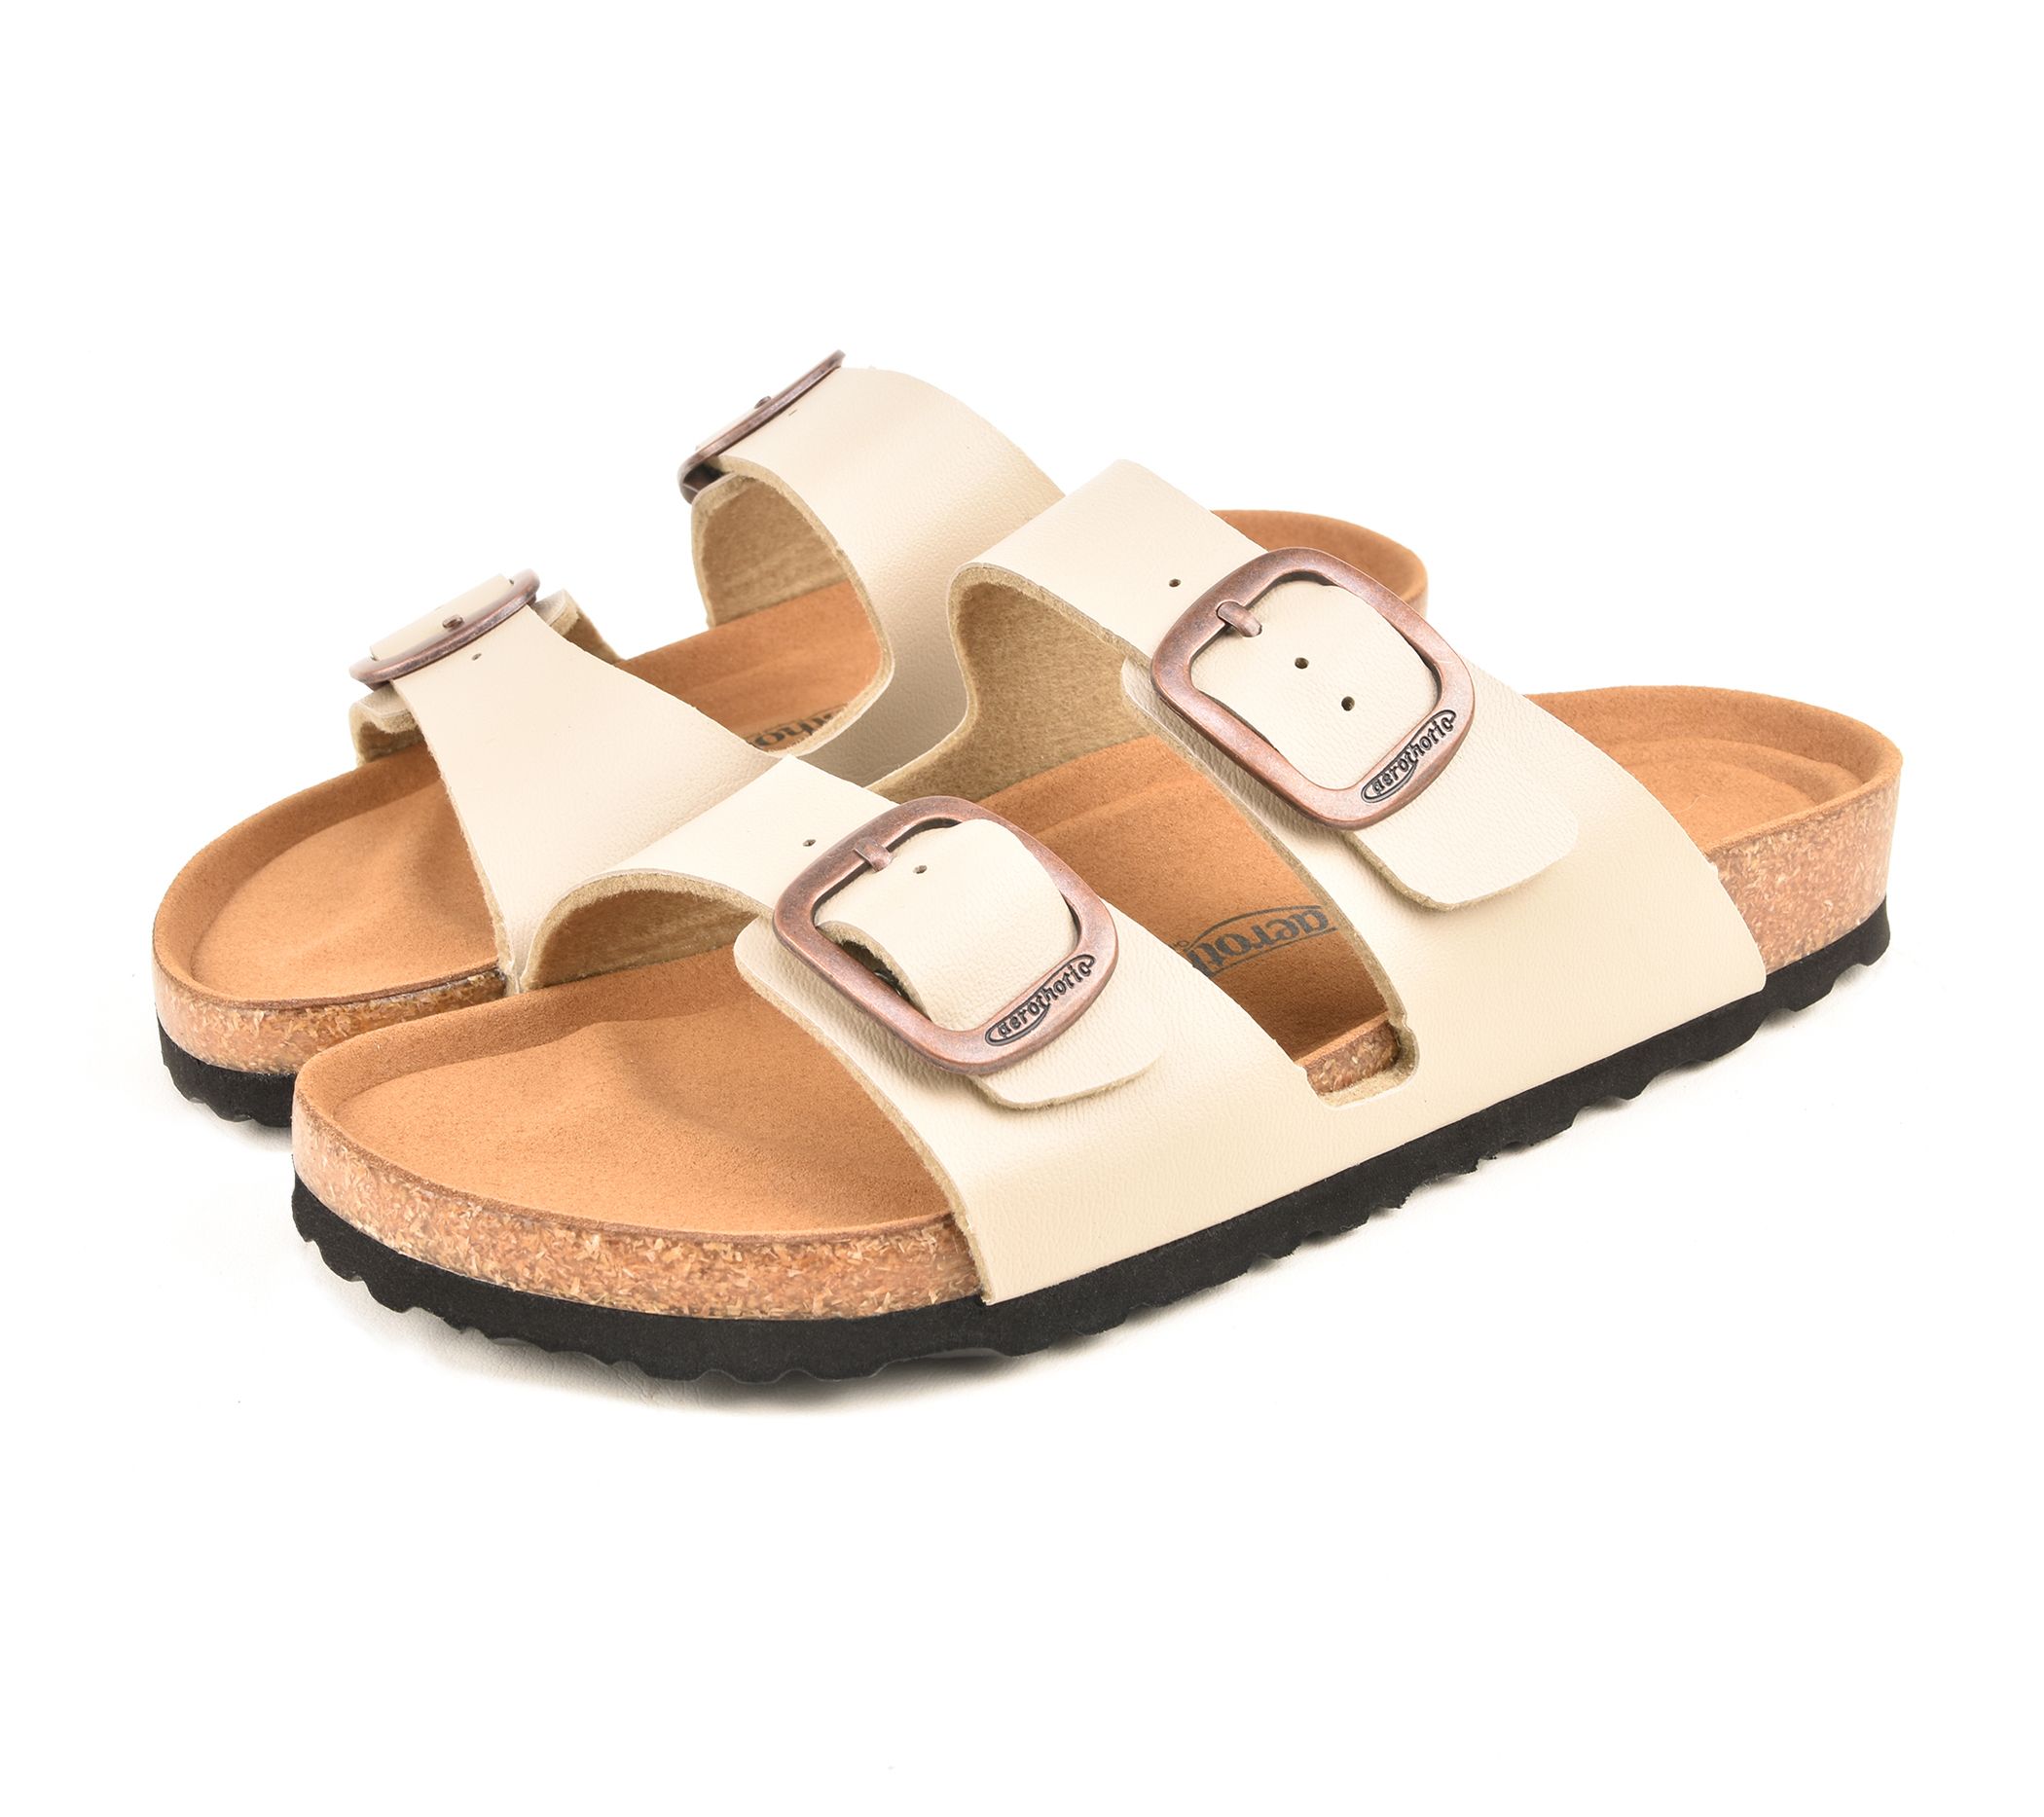 Shoppers Love these Aerothotic Sandals for Travel